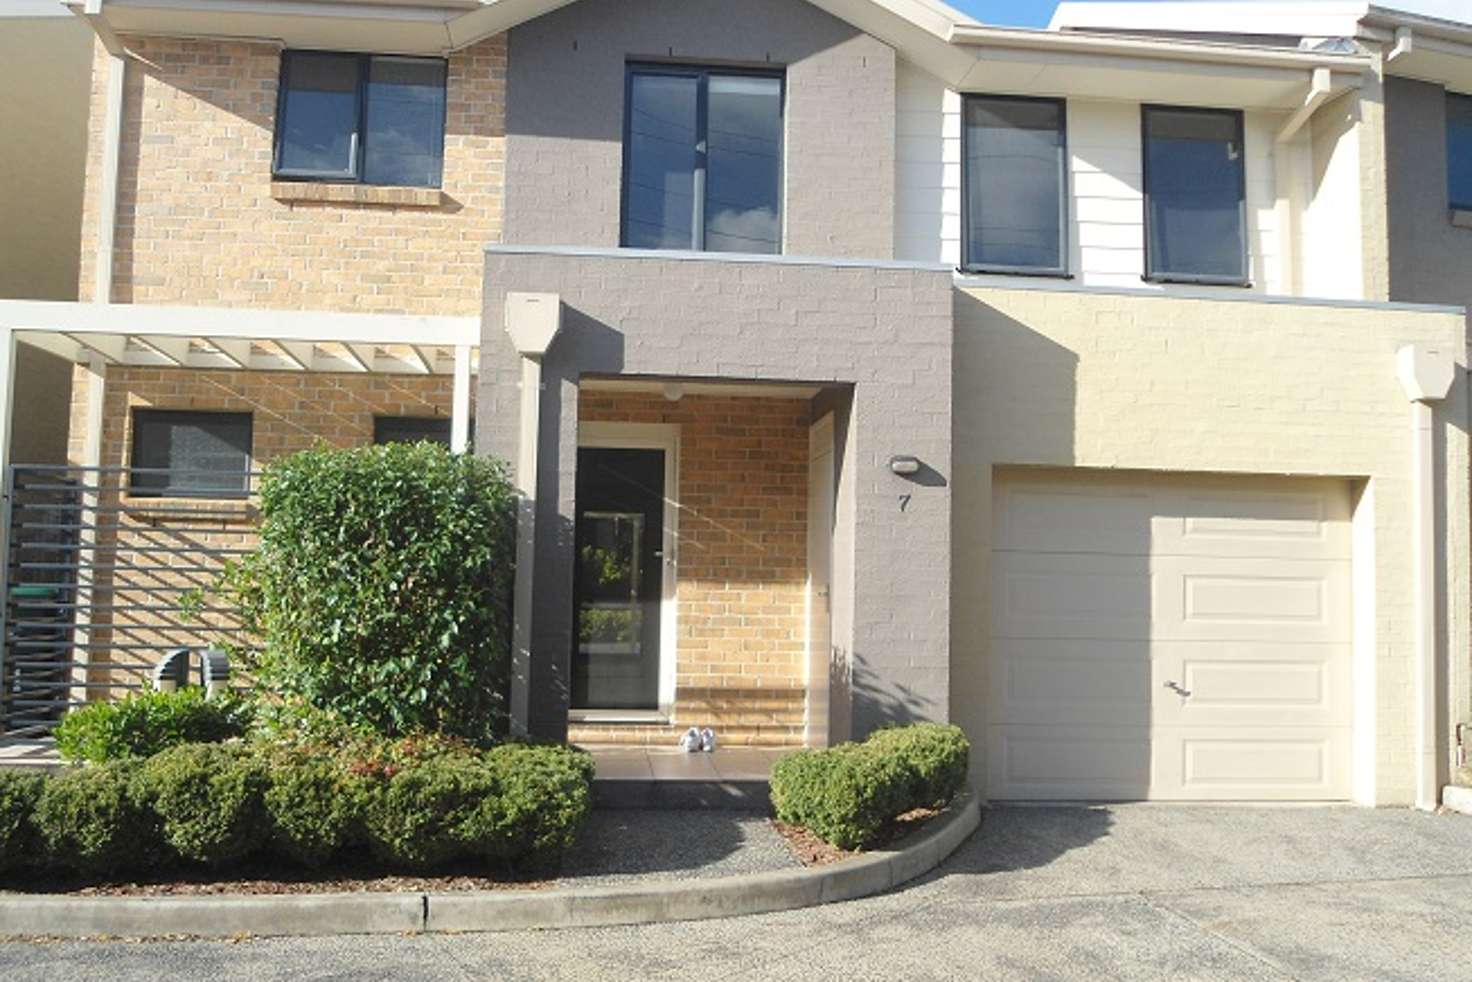 Main view of Homely townhouse listing, 7/1 Stansfield, Bankstown NSW 2200